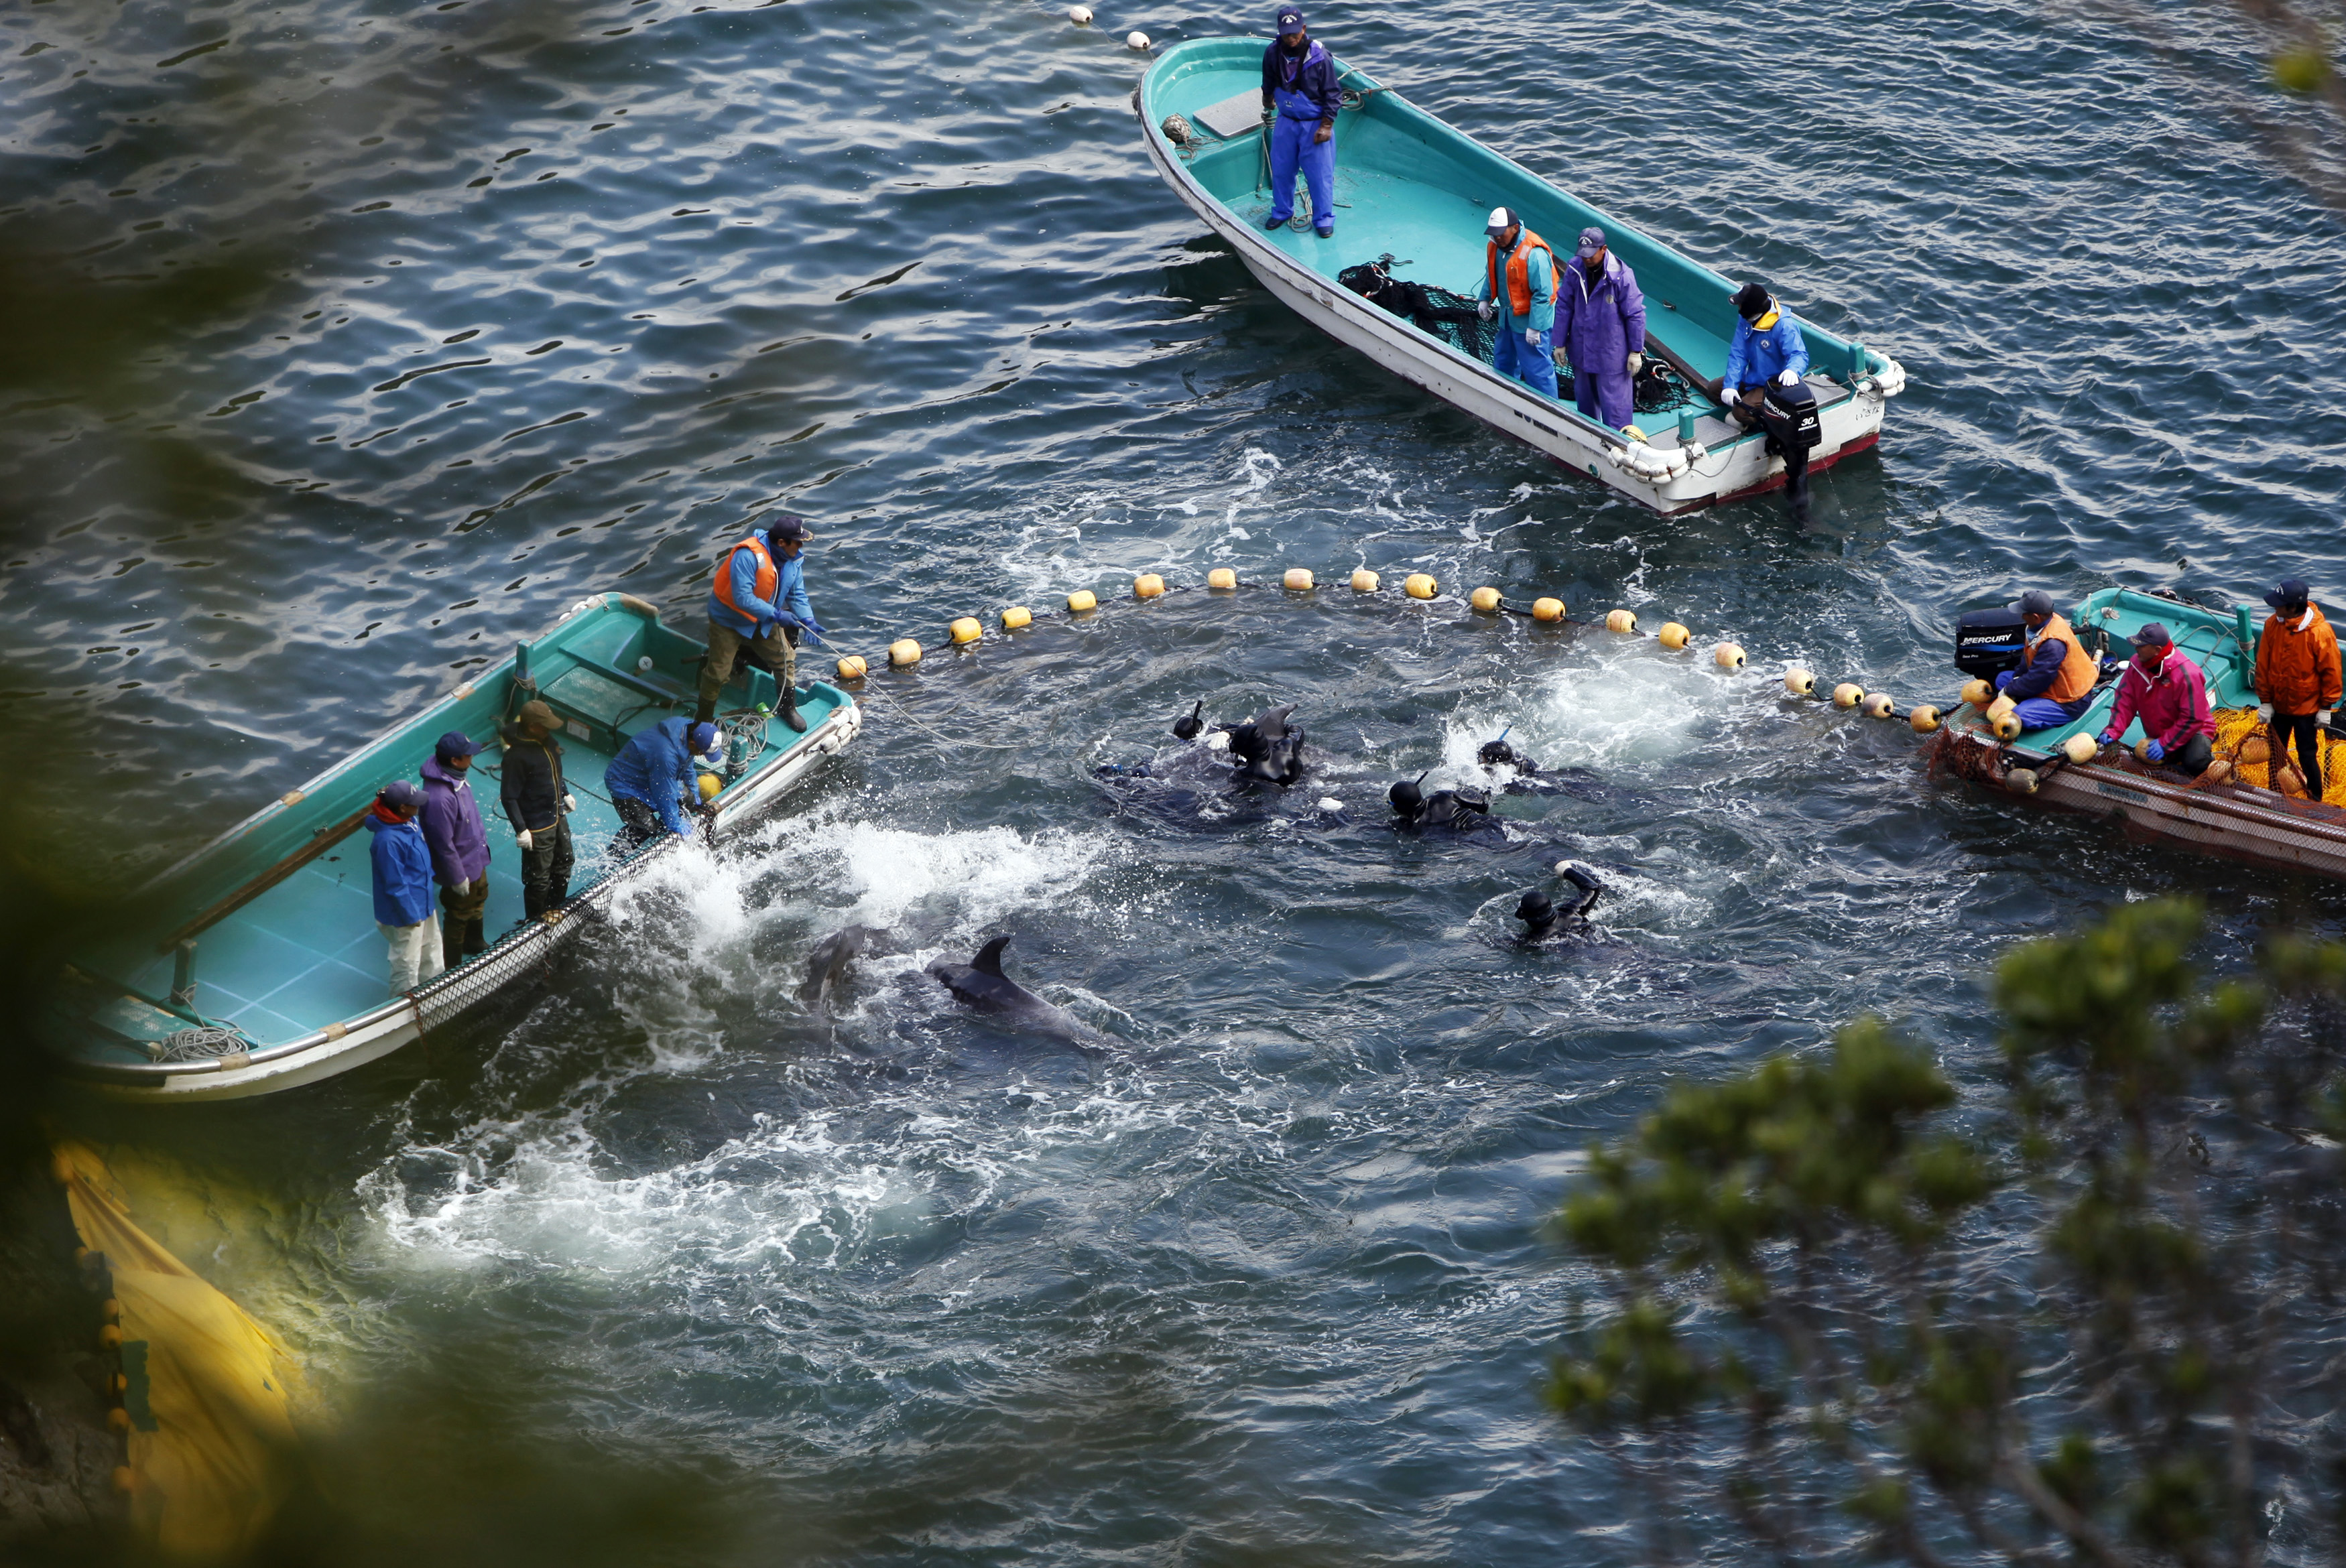 Fishermen hunt dolphins at a cove in Taiji, western Japan, on Jan. 20, 2014 (Adrian Mylne—Reuters)